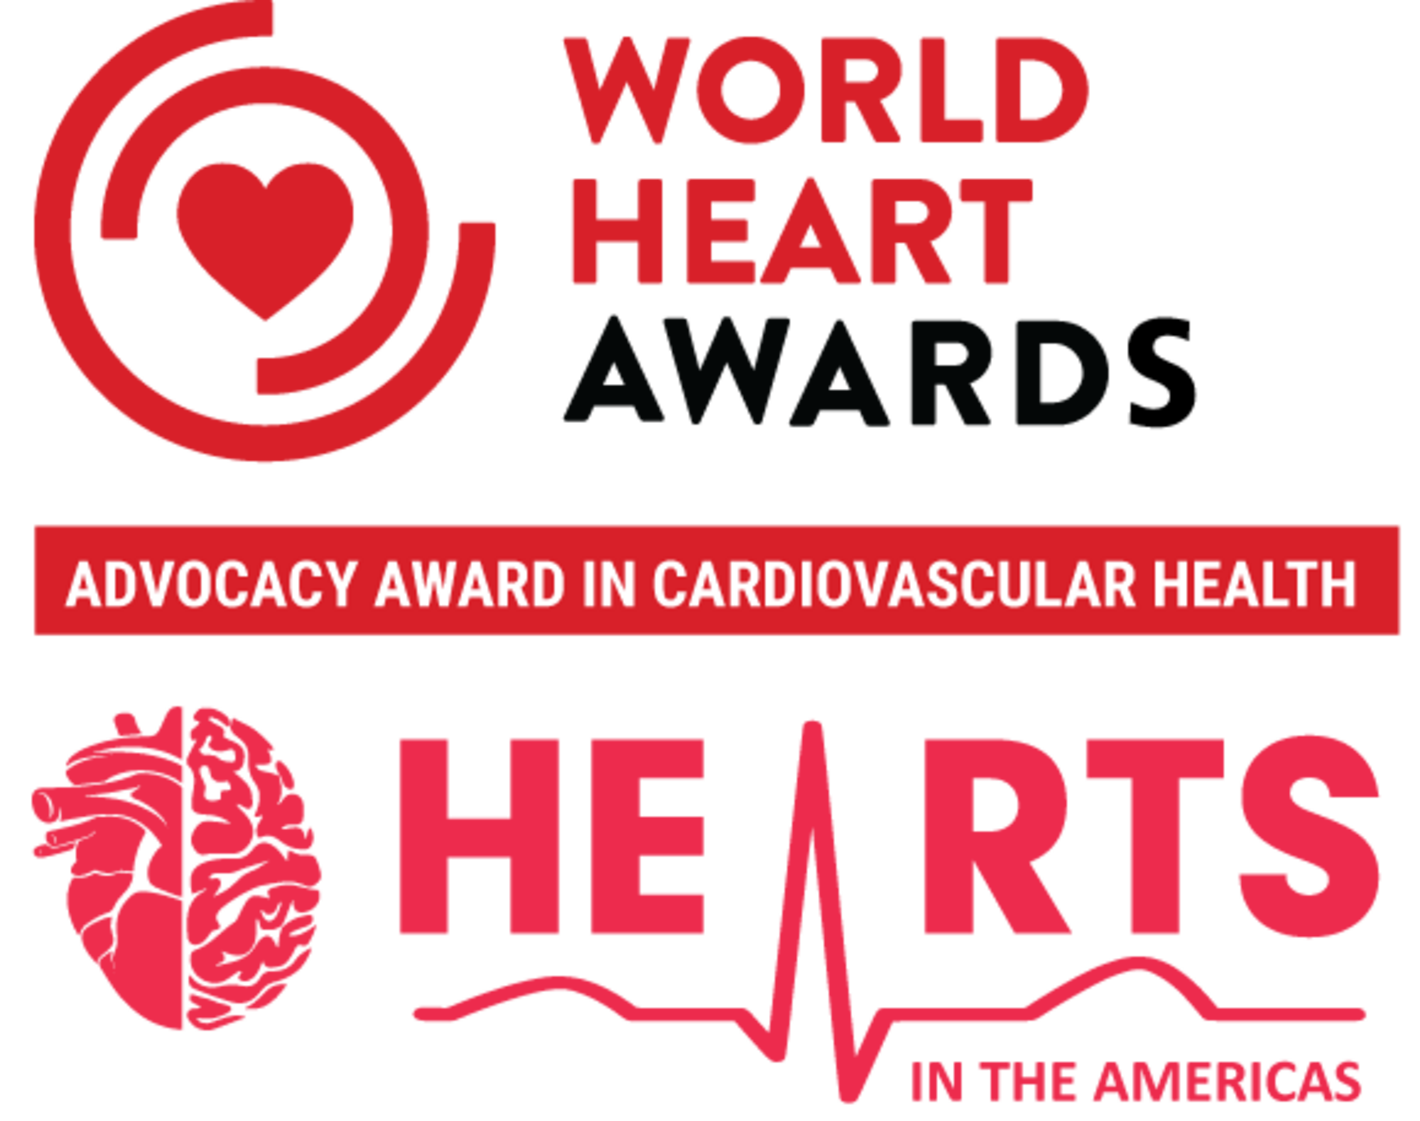 Initiative HEARTS in the Americas Recognized with World Heart Federation  Advocacy Award in Cardiovascular Health - PAHO/WHO